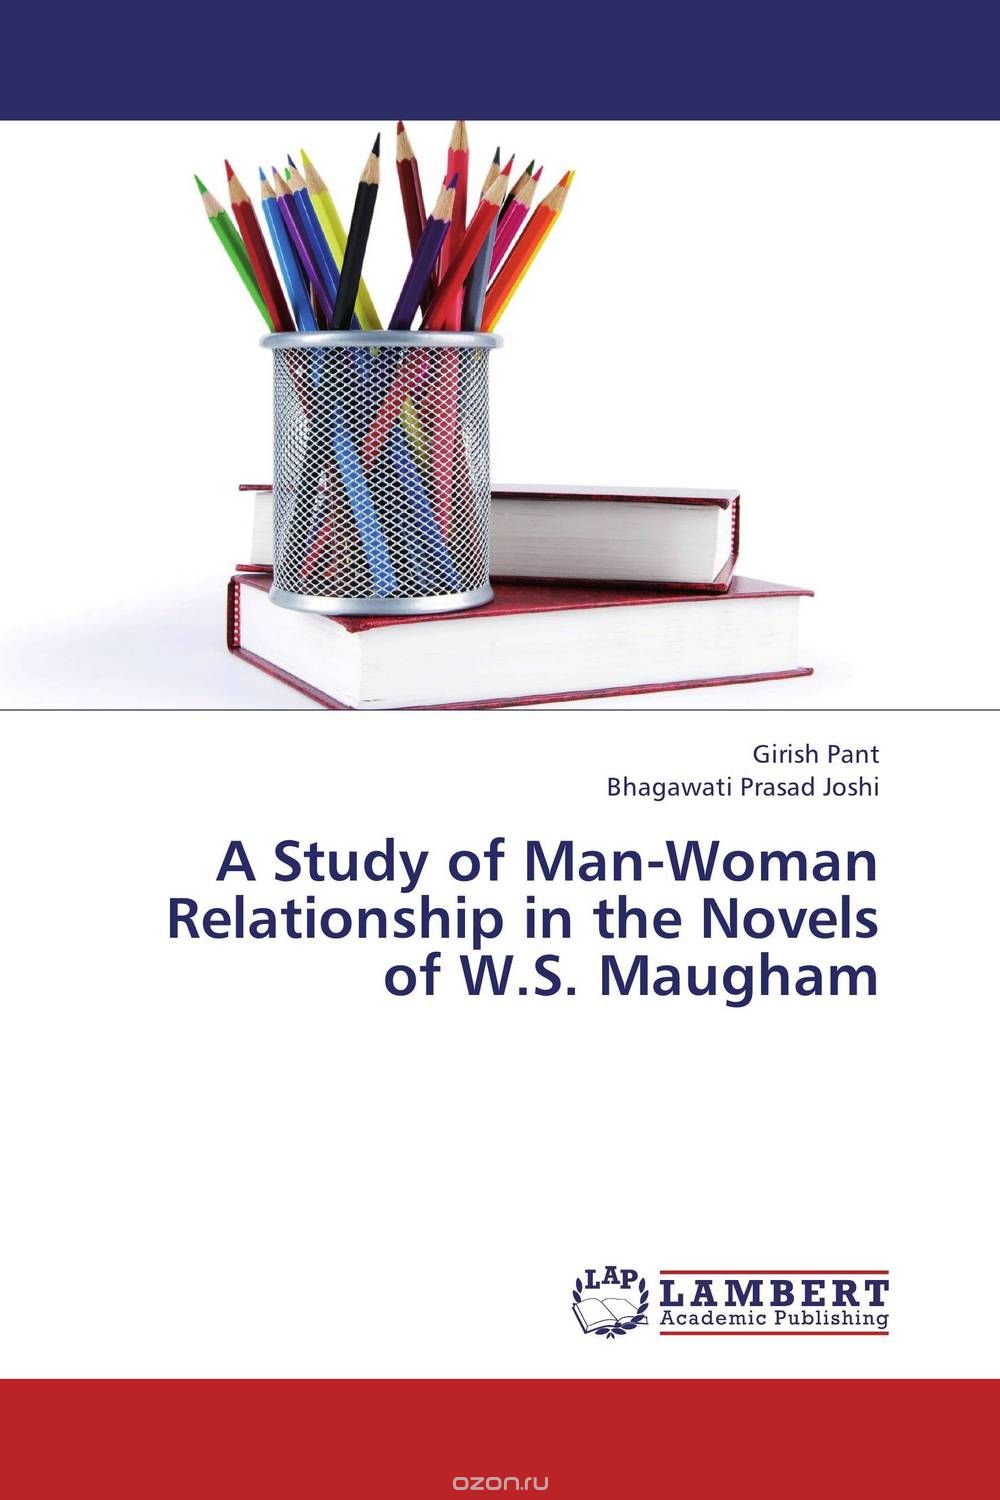 A Study of Man-Woman Relationship in the Novels of W.S. Maugham